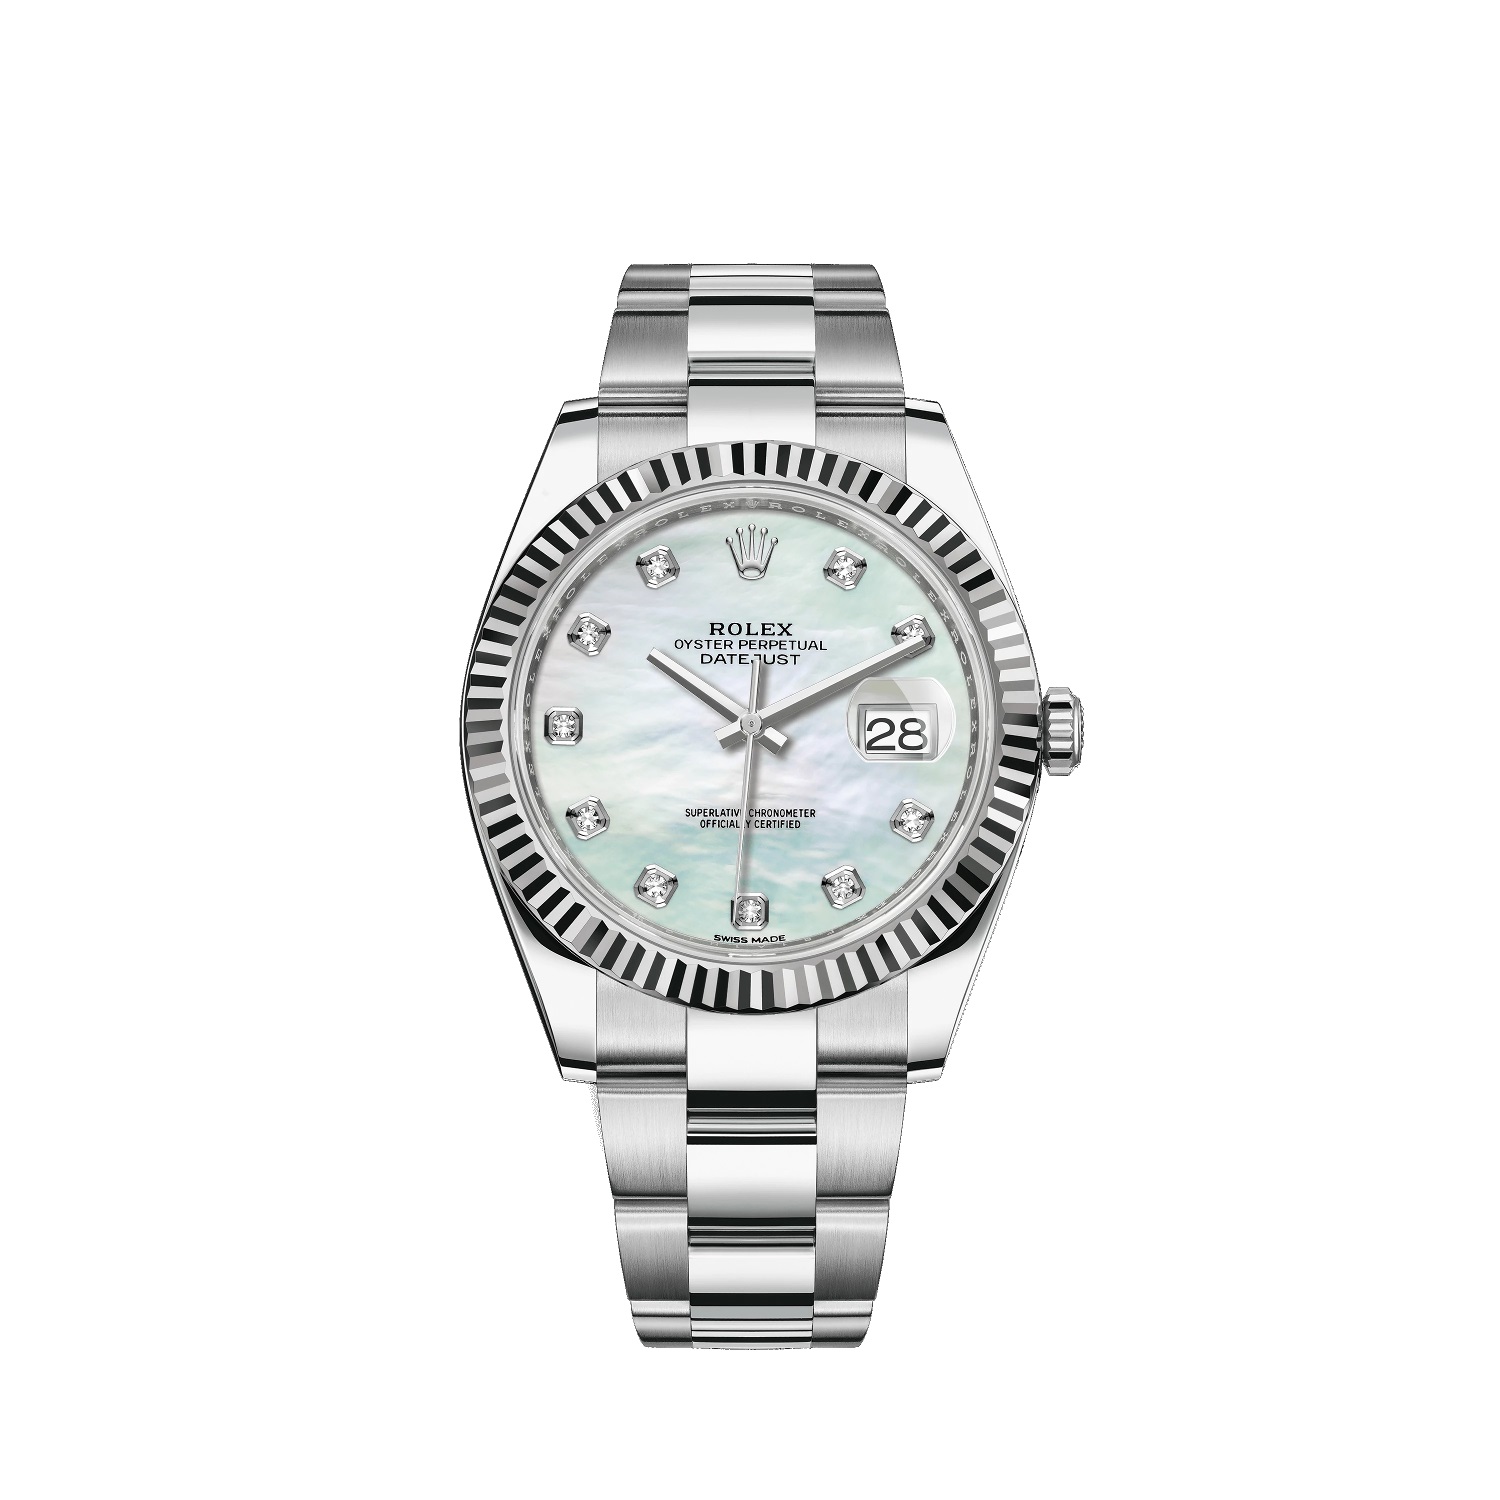 Datejust 41 126334 White Gold & Stainless Steel Watch (White Mother-of-Pearl Set with Diamonds)